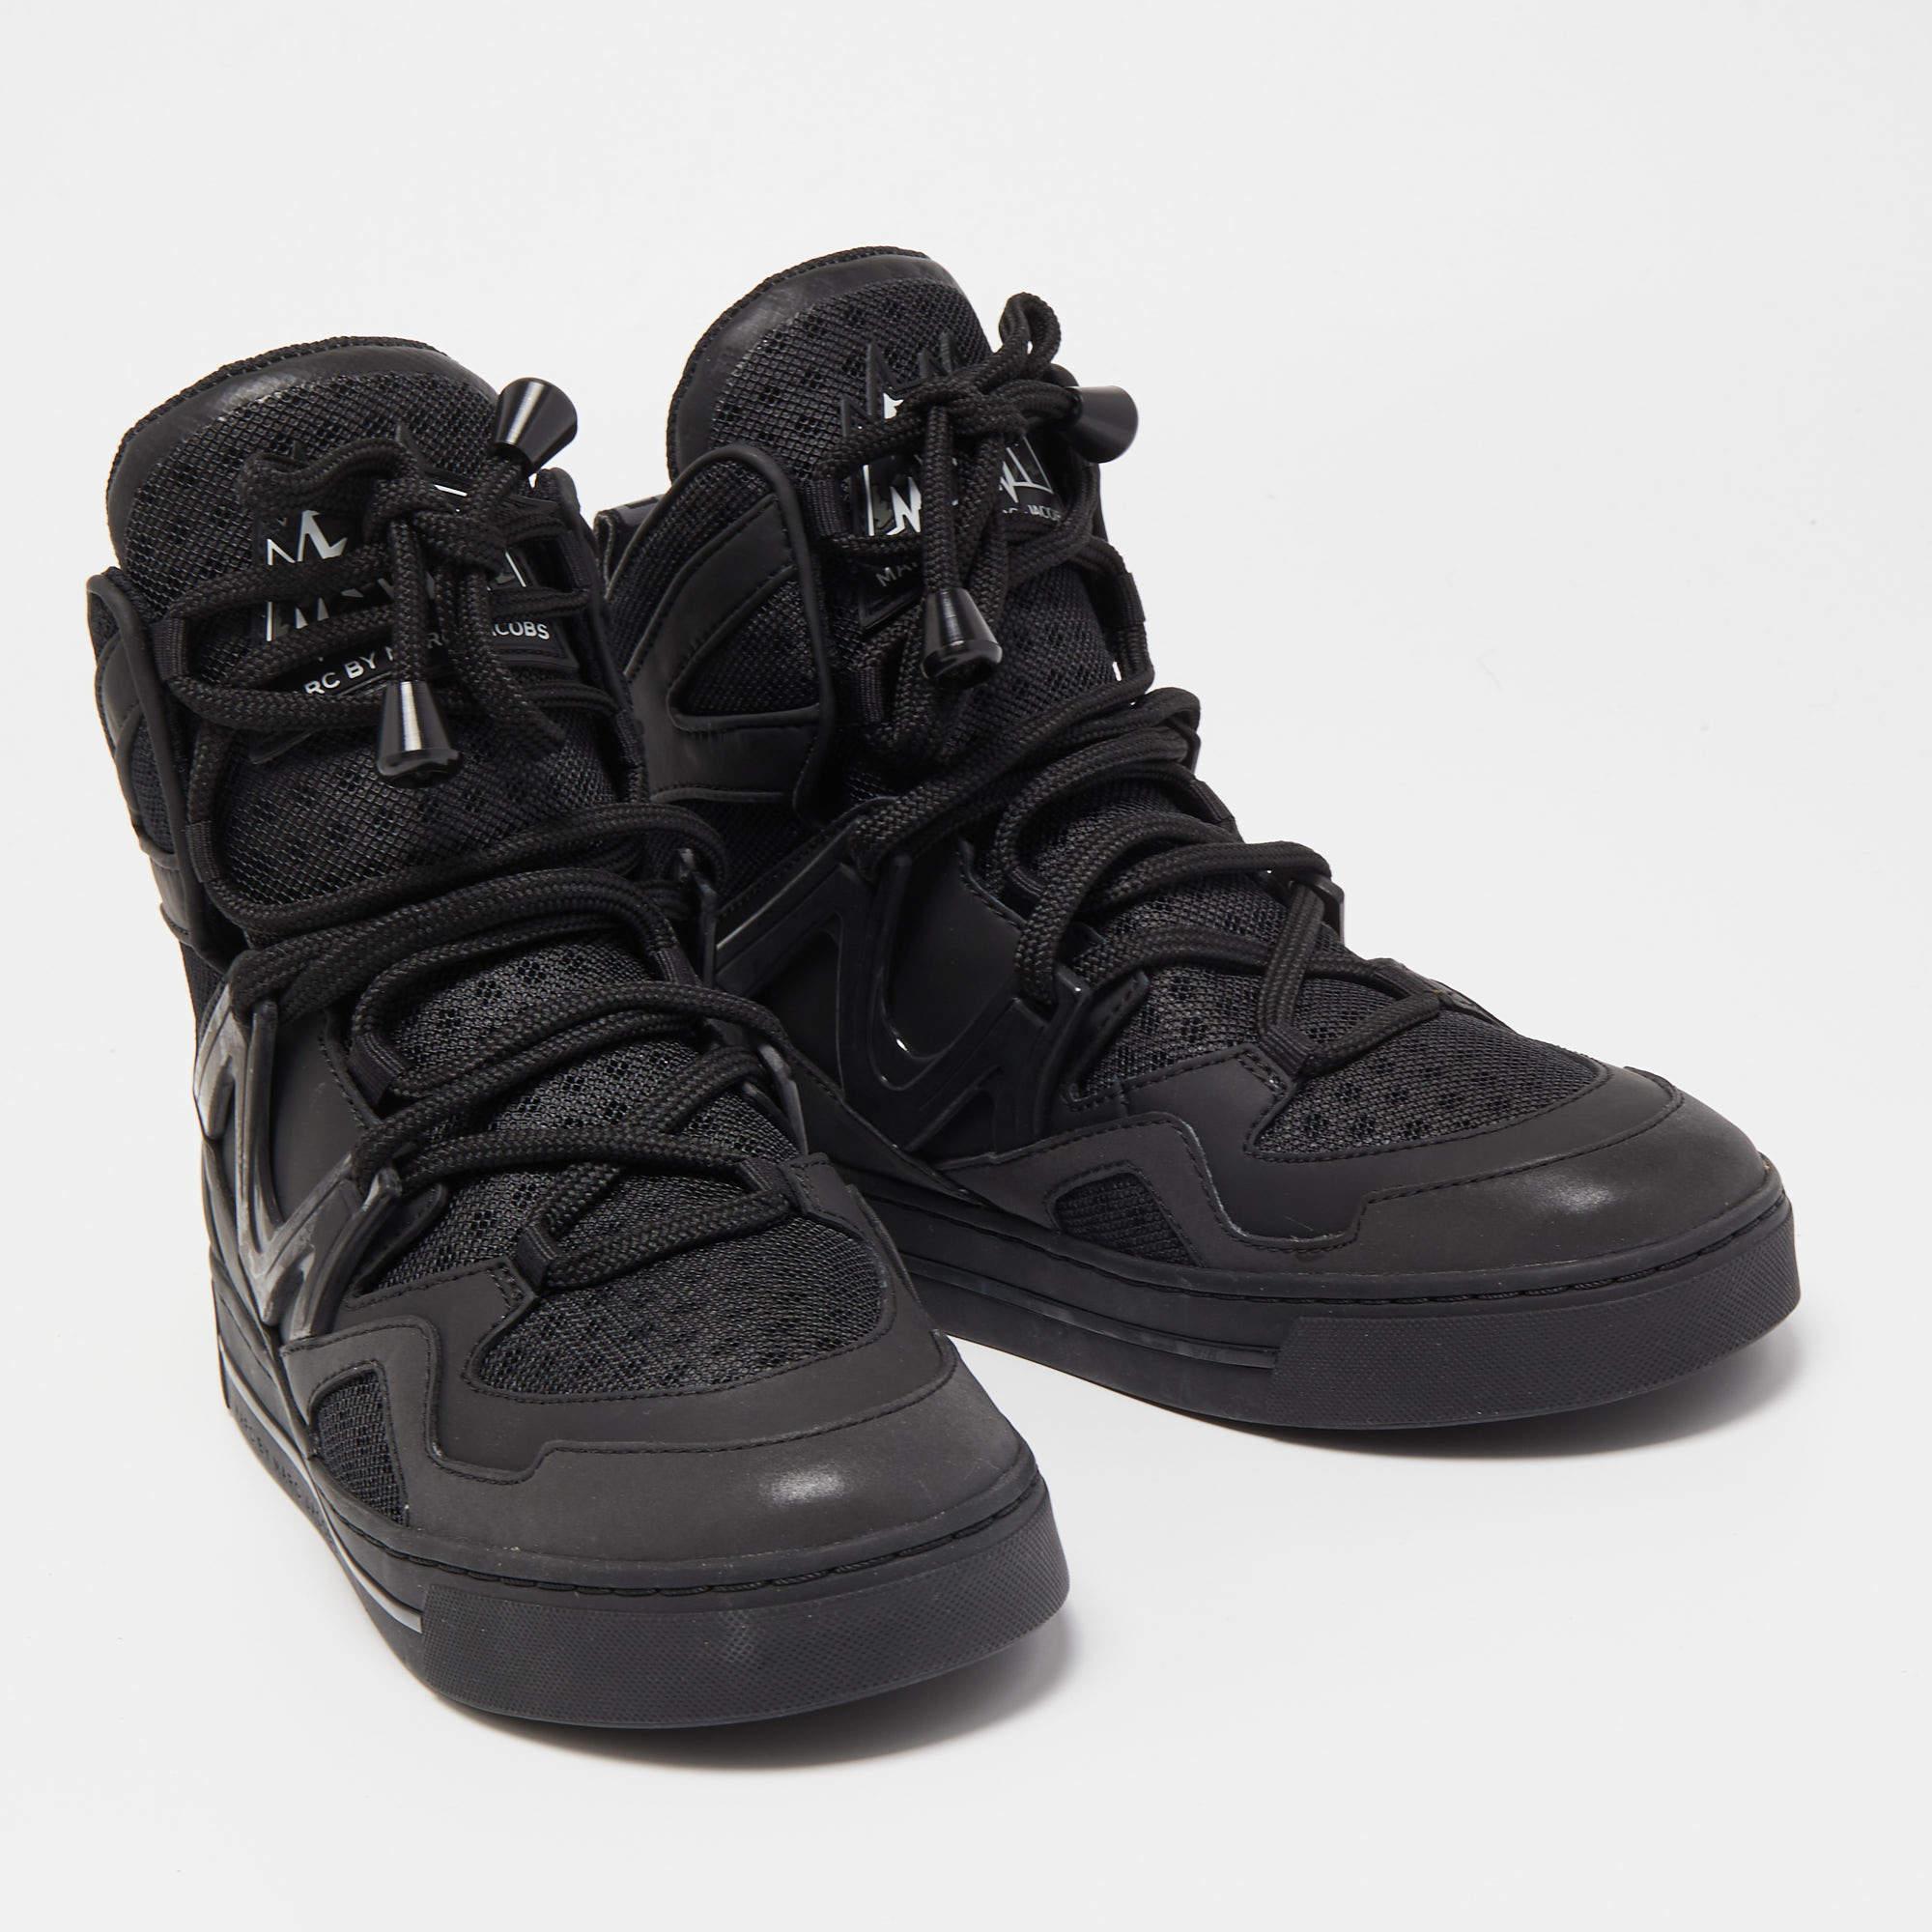 Marc by Marc Jacobs Black Leather and Mesh High Top Sneakers Size 37 5